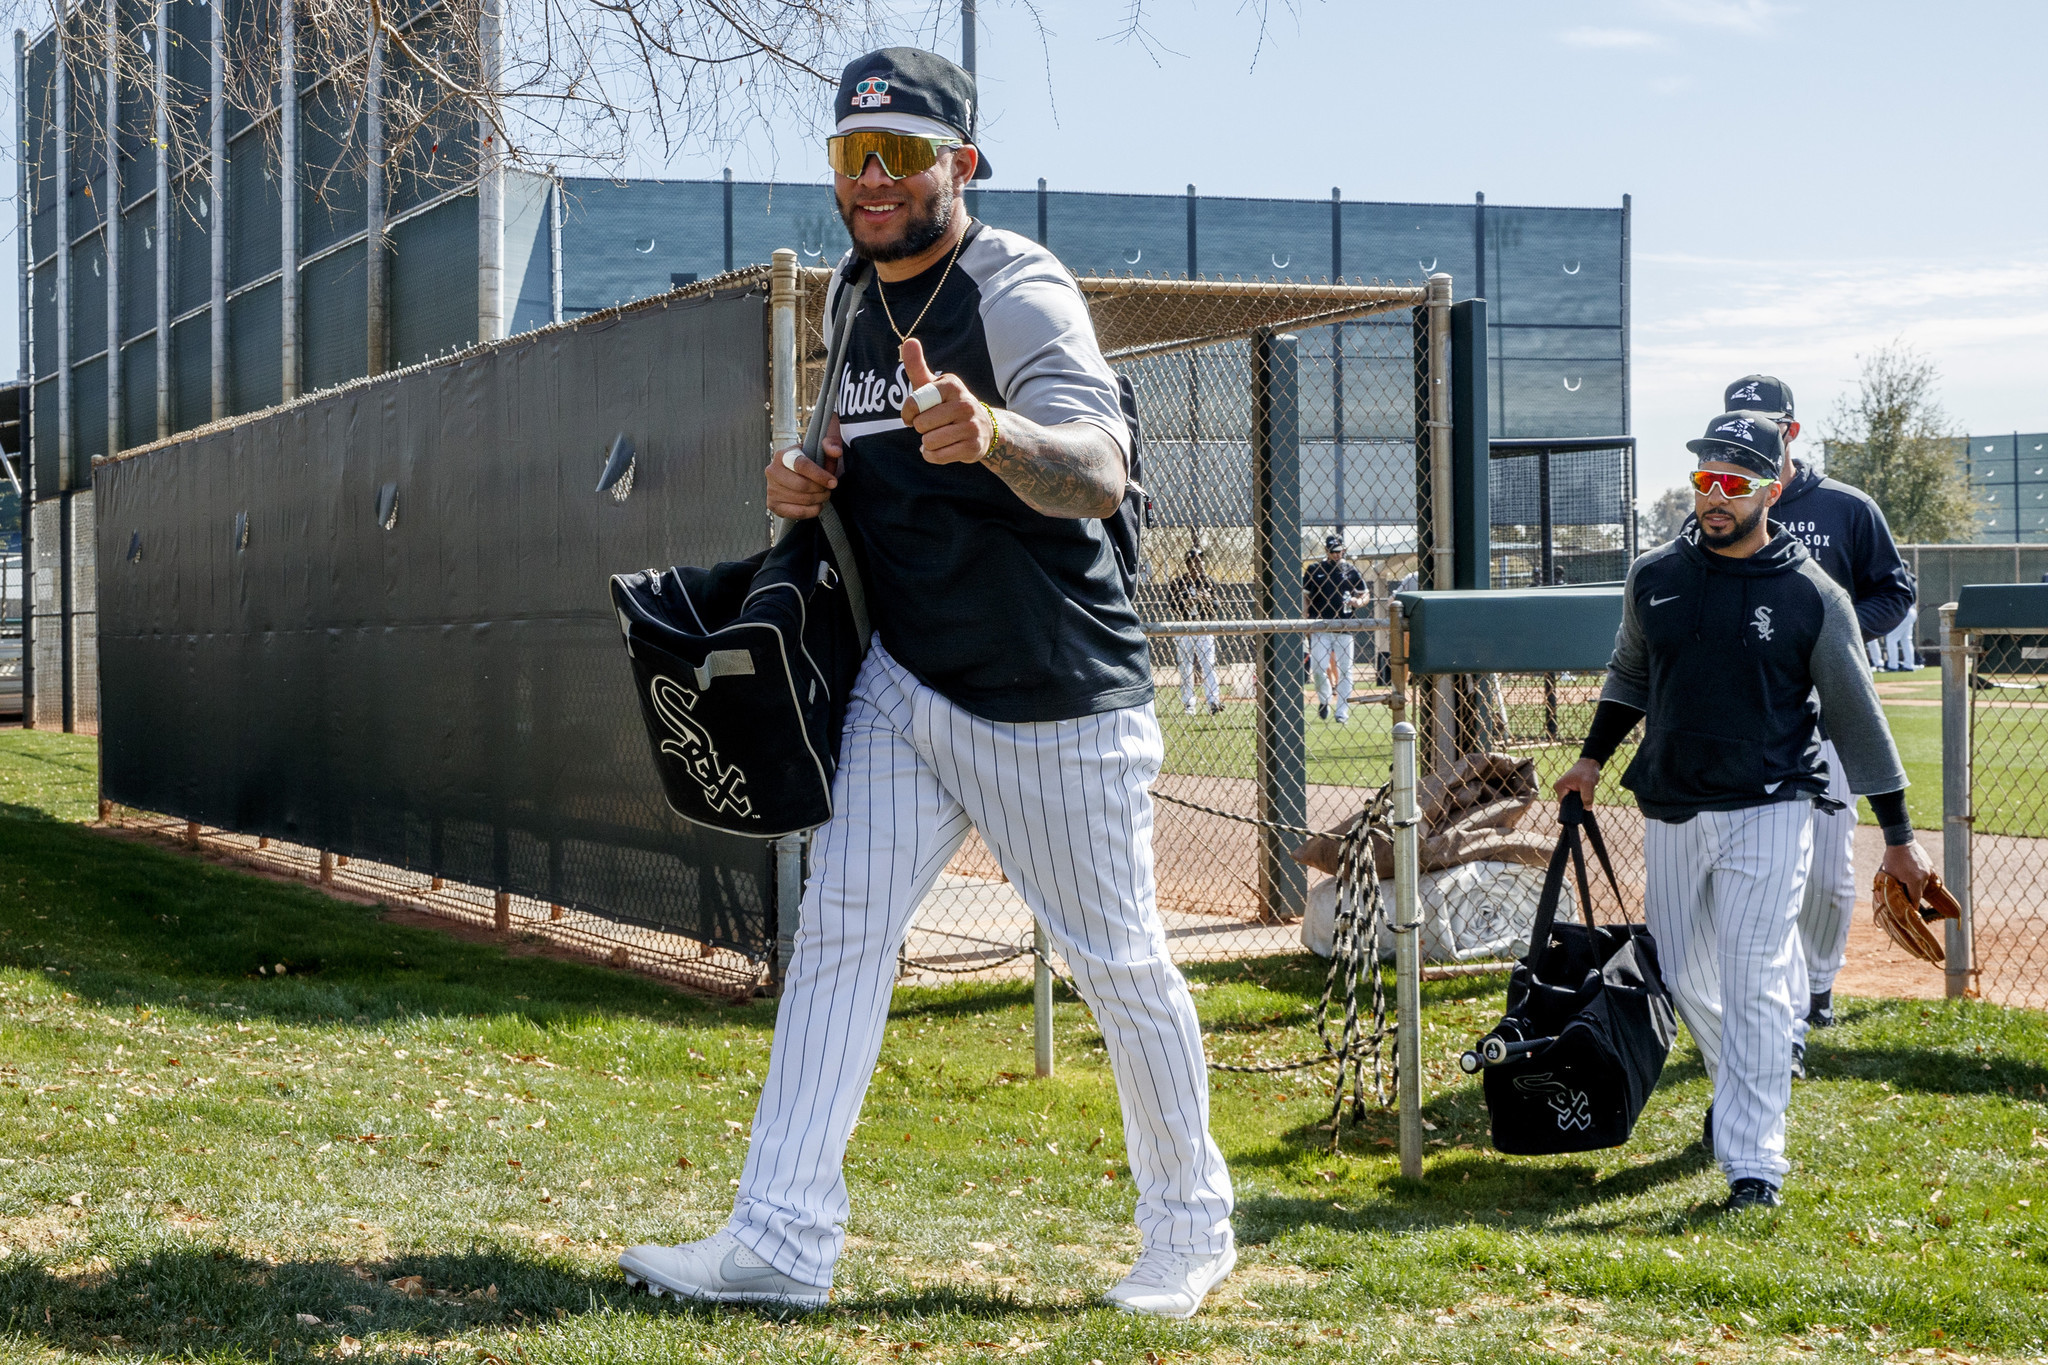 Warm thoughts: Cubs and White Sox at spring training